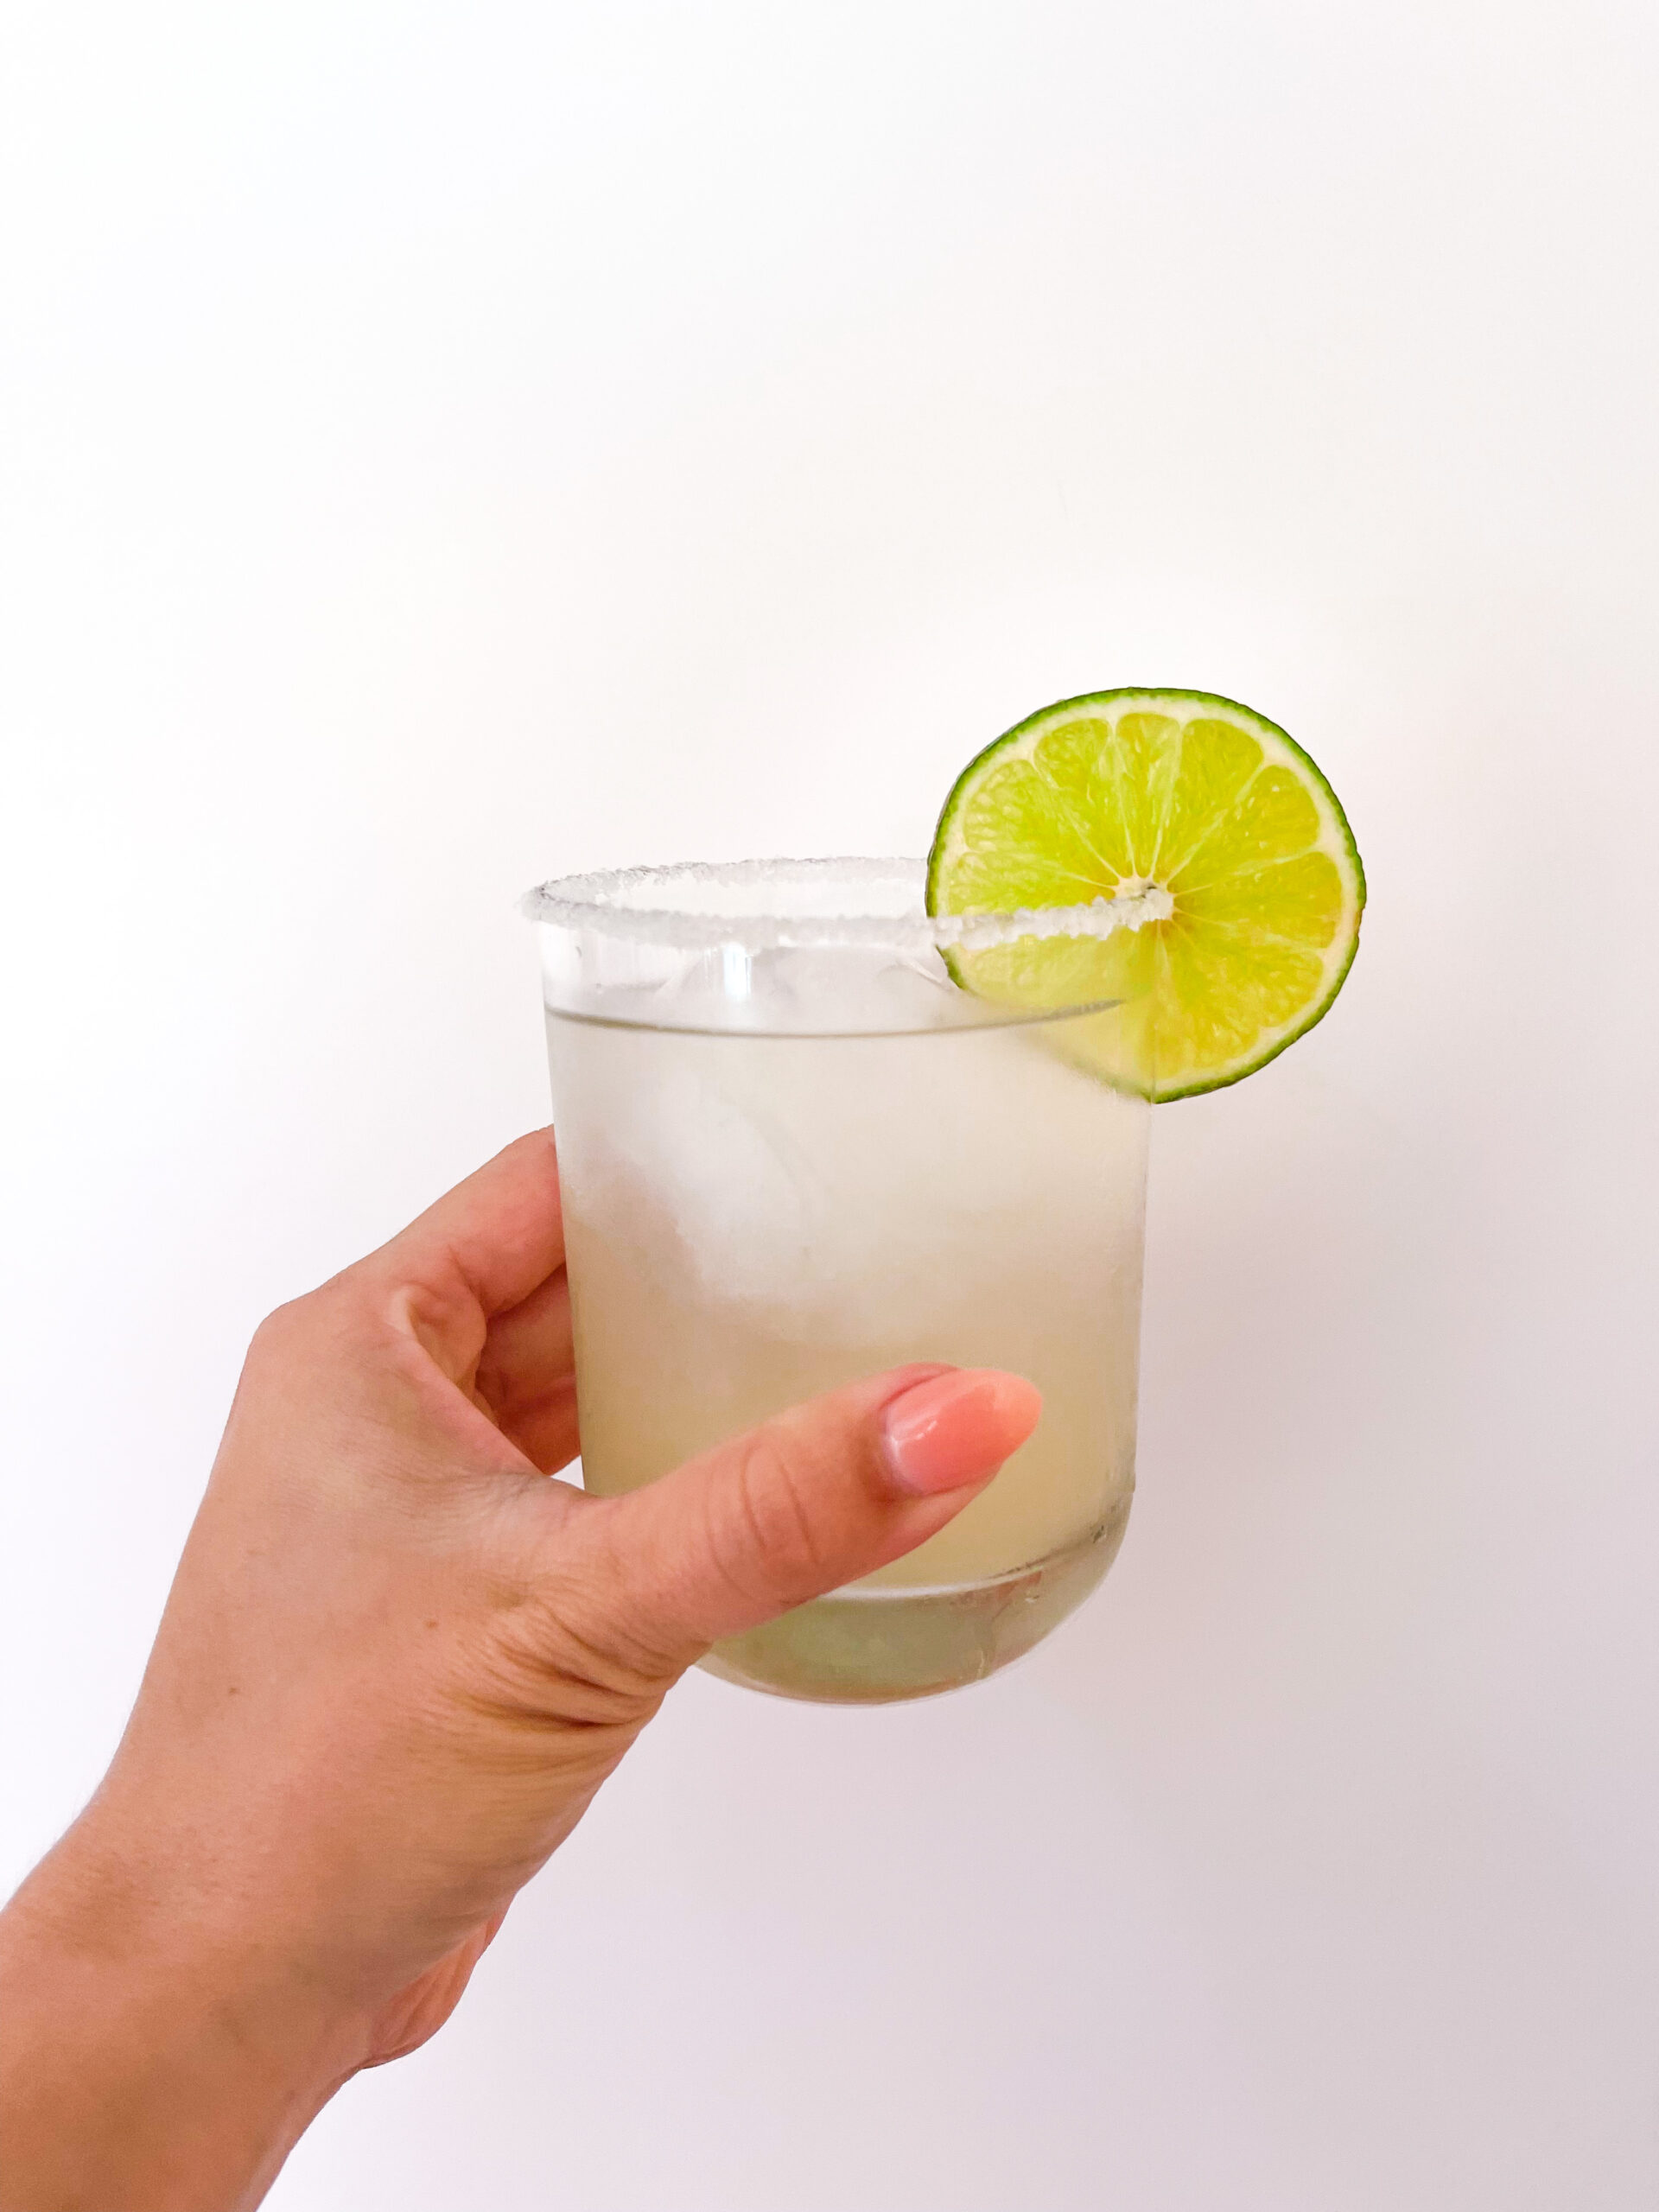 Sometimes you just feel like enjoying a classic lime margarita. This simple margarita recipe is worth memorizing. That way, you can whip it out at a moments notice and impress your friends or even just yourself! It's so simple and satisfying, and it's made with just 4 ingredients that are easy to always have on hand. | kirstenturk.com